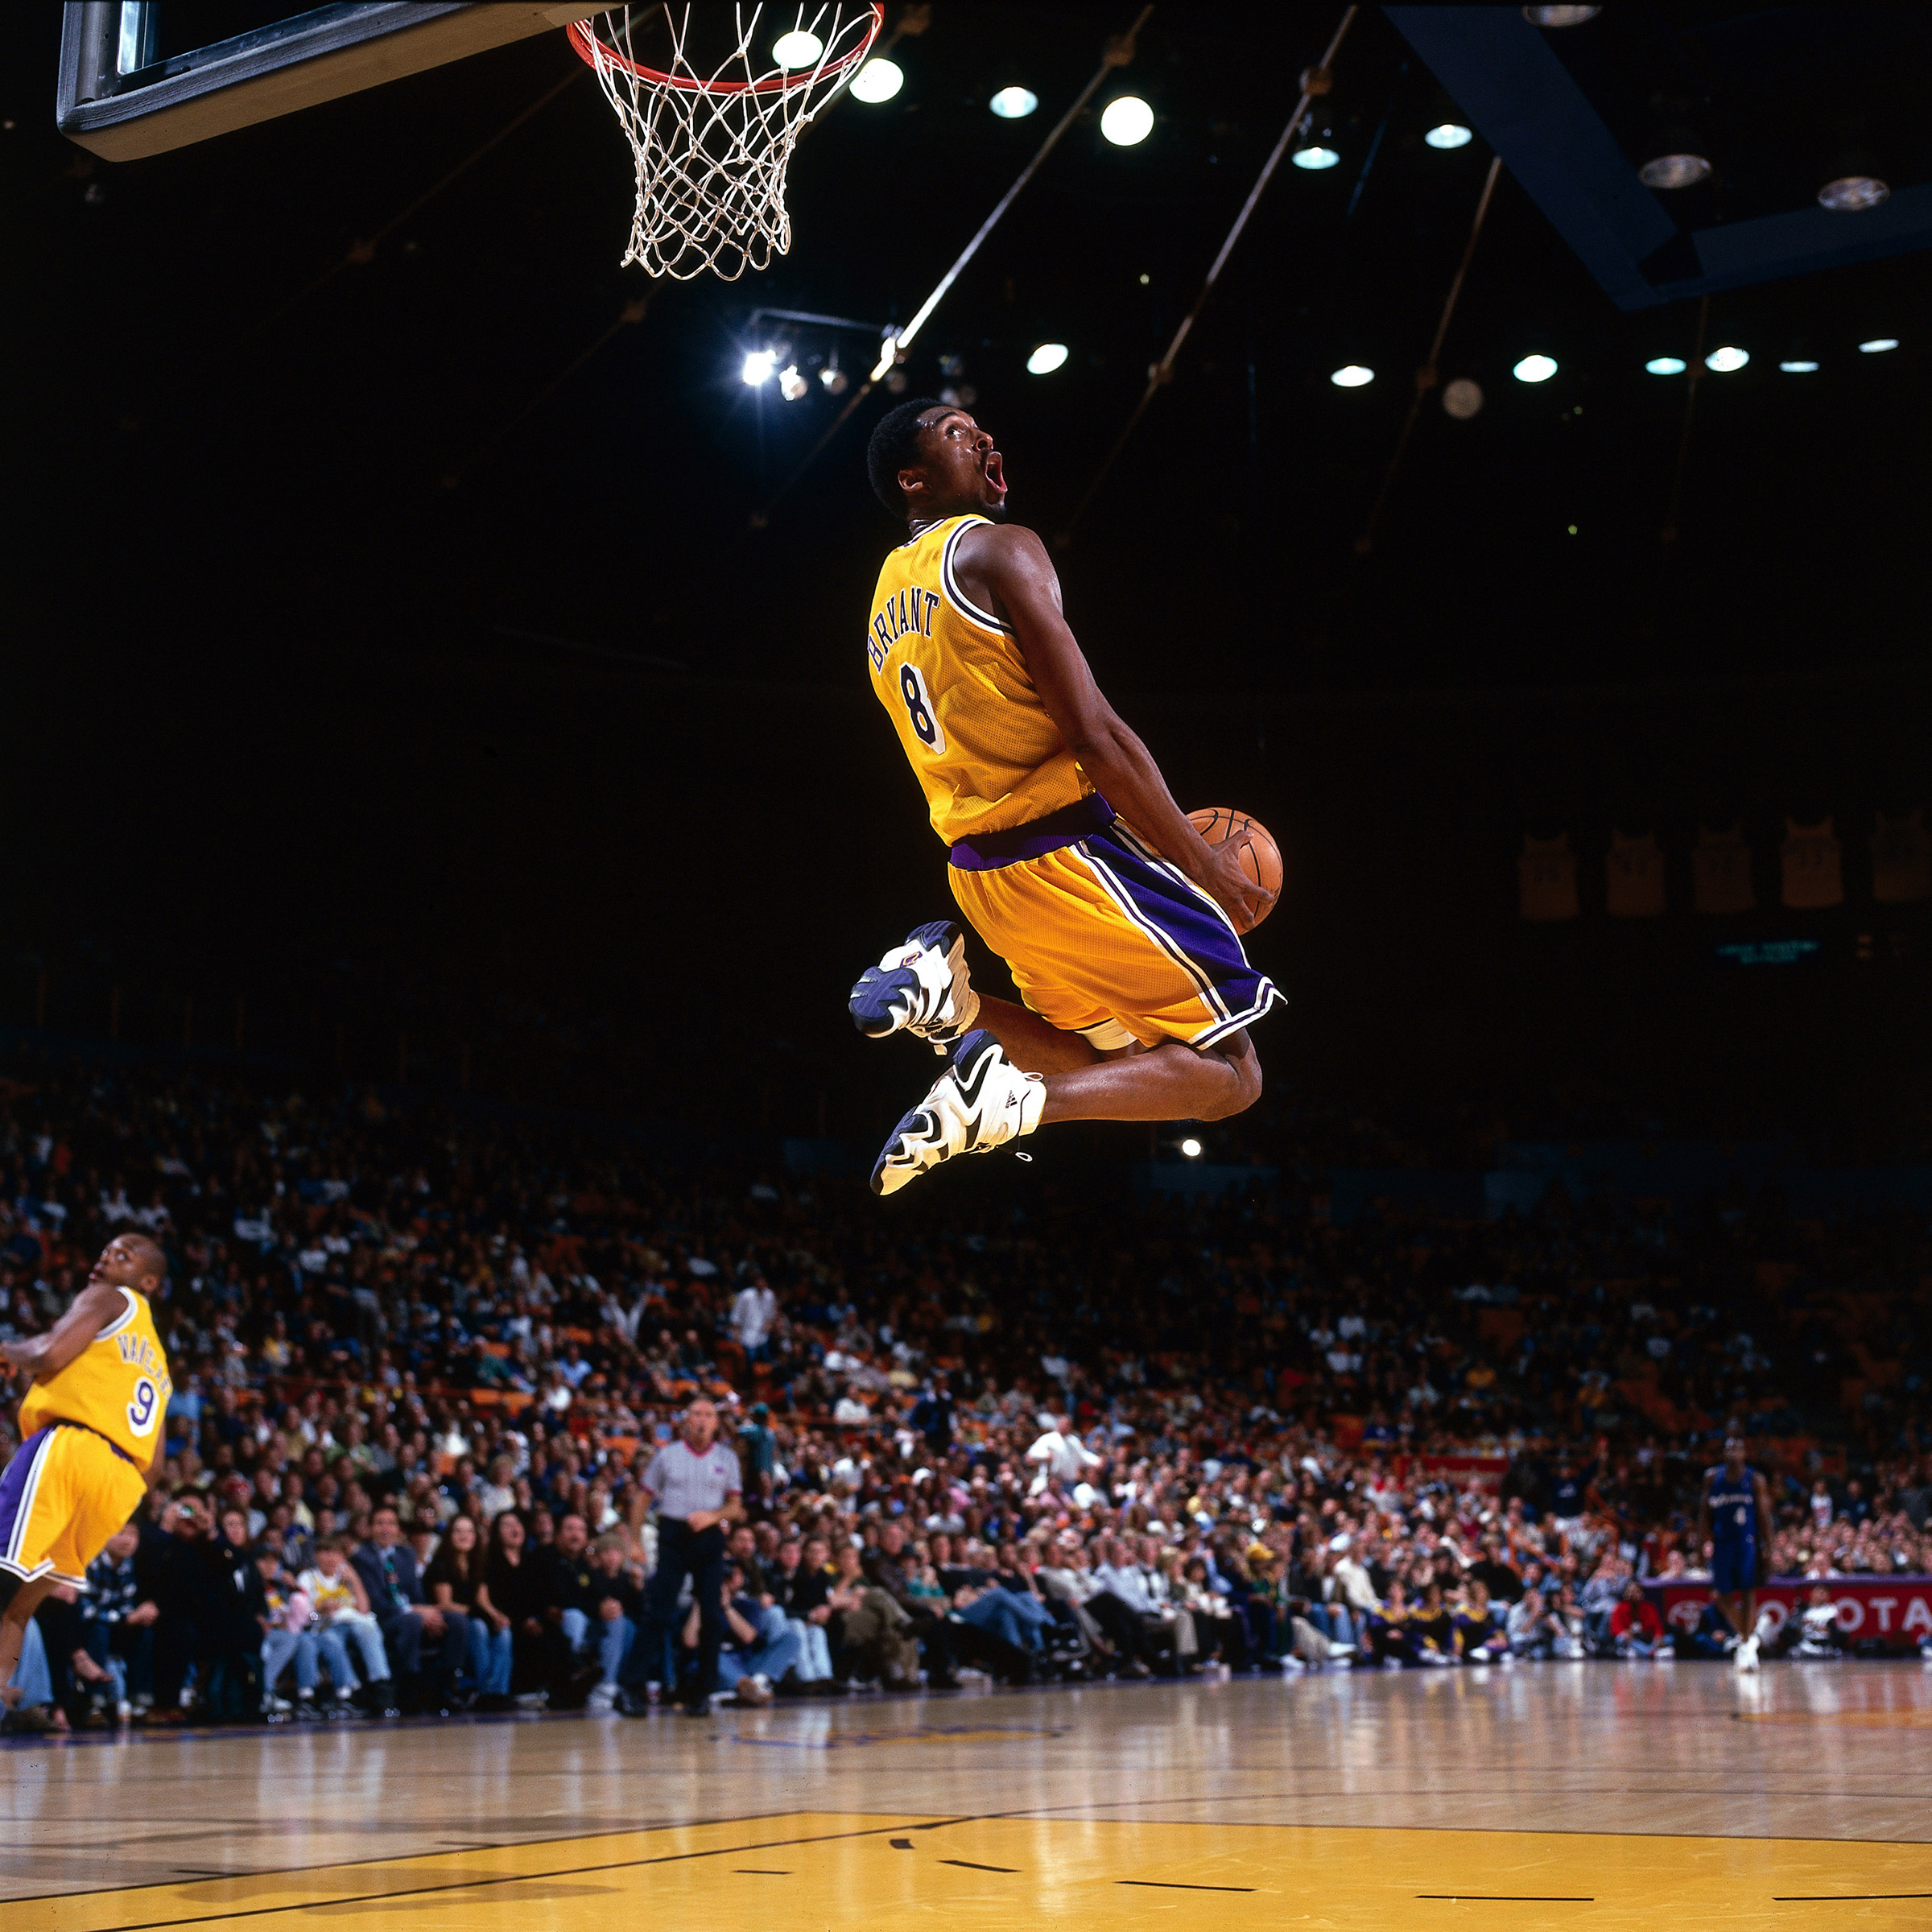 Bryant’s aerial displays were among the game’s most thrilling ever; here, a reverse slam in a 1998 home game (Andrew D. Bernstein—NBAE/Getty Images)